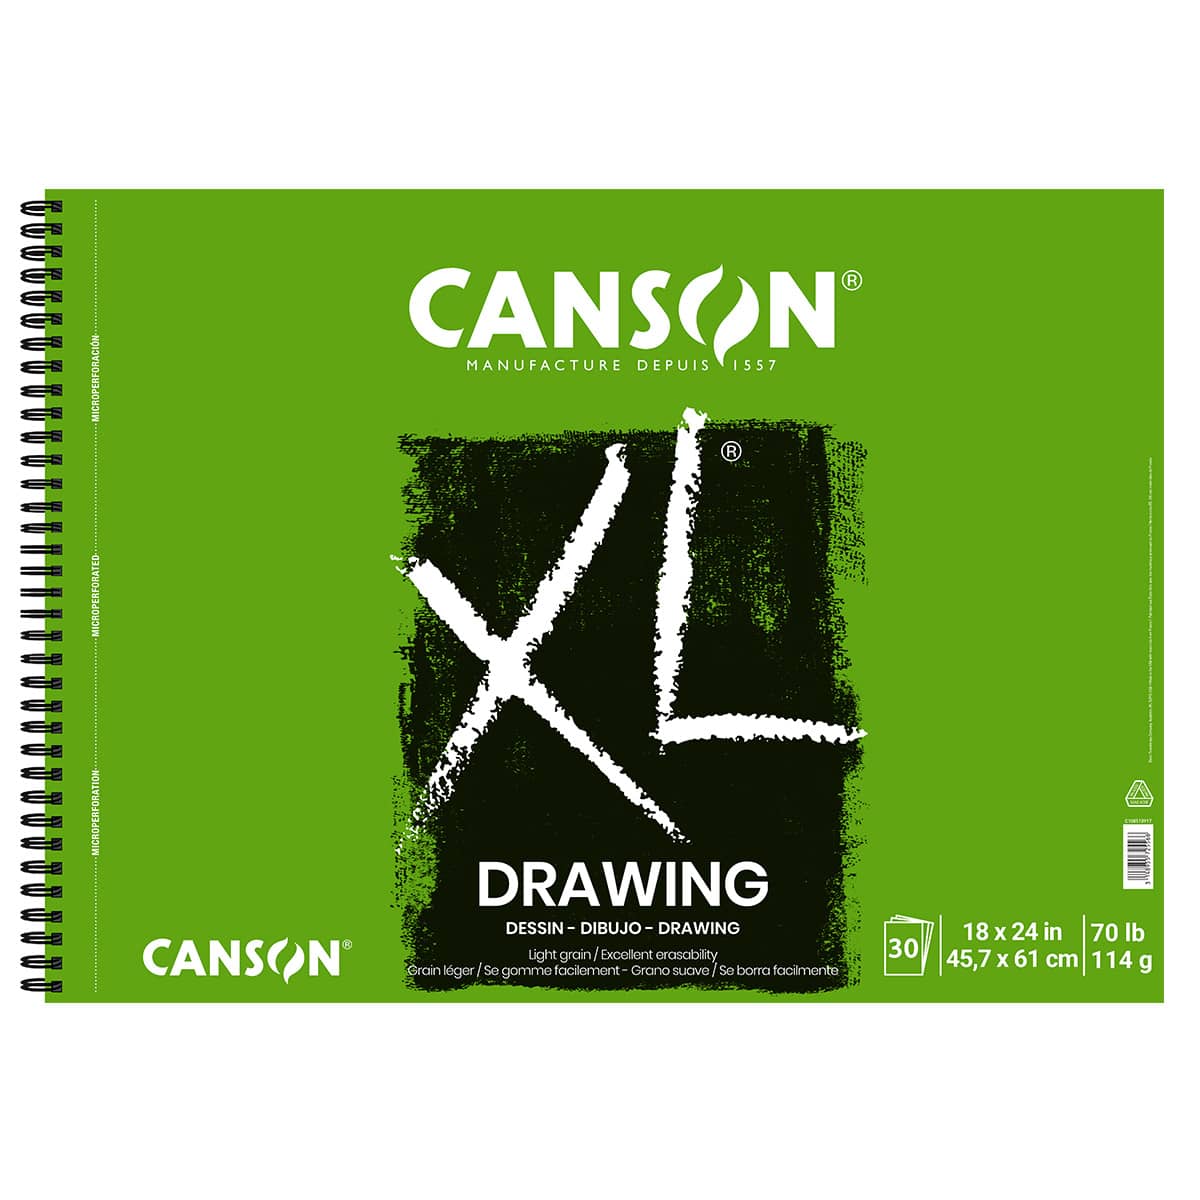 Canson Universal Sketch Pad 18x24